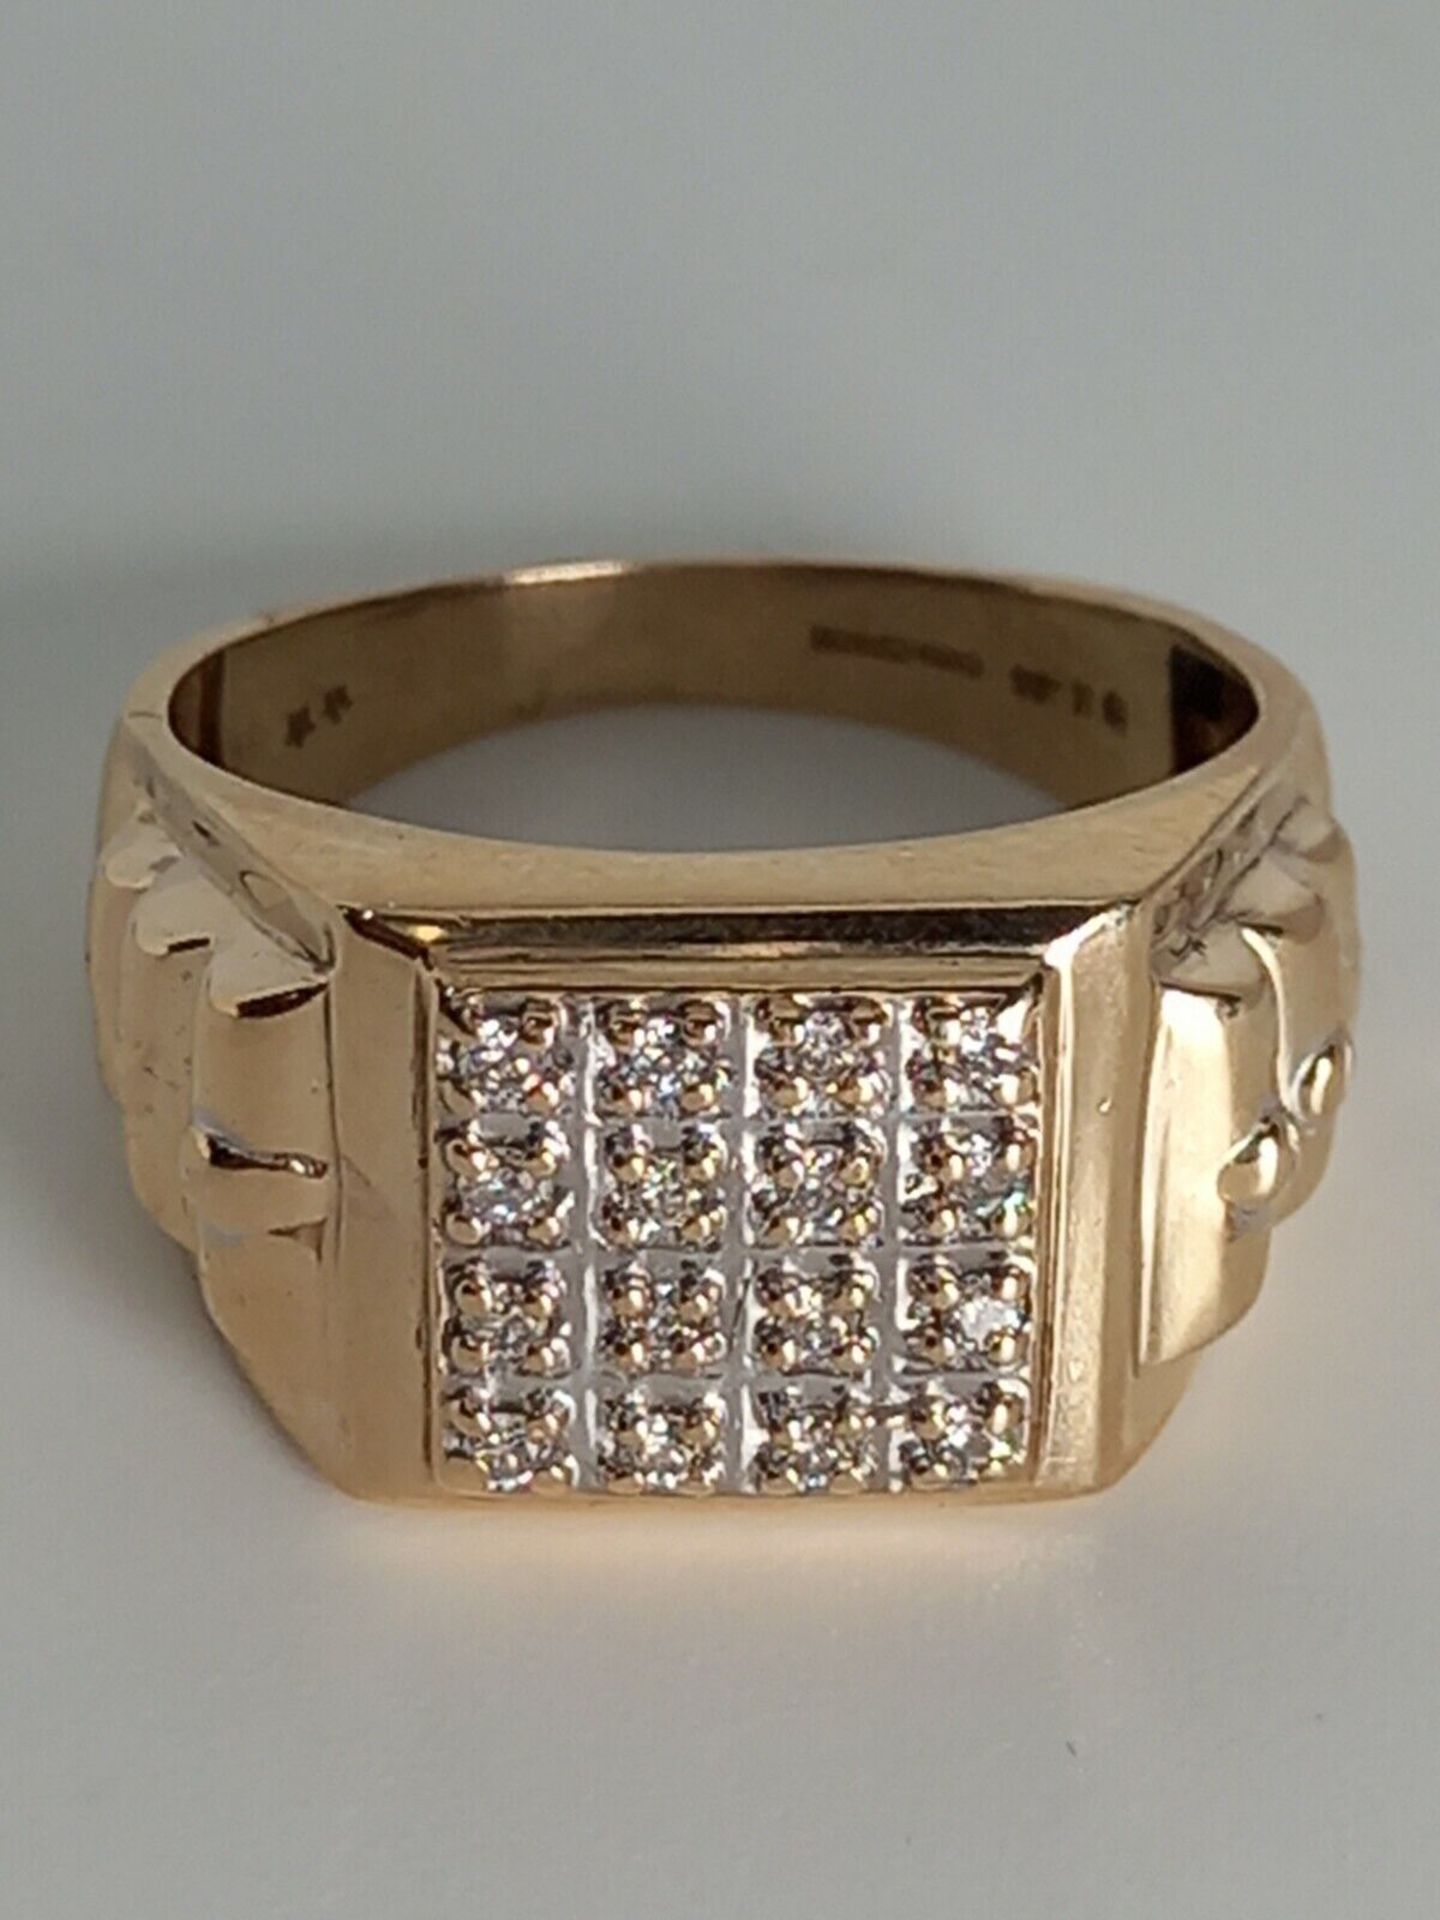 SIGNET RING FEATURES 16 DIAMONDS IN A LUX PAVE SETTING, ENCLAVED IN 9CT YELLOW GOLD - Image 5 of 5